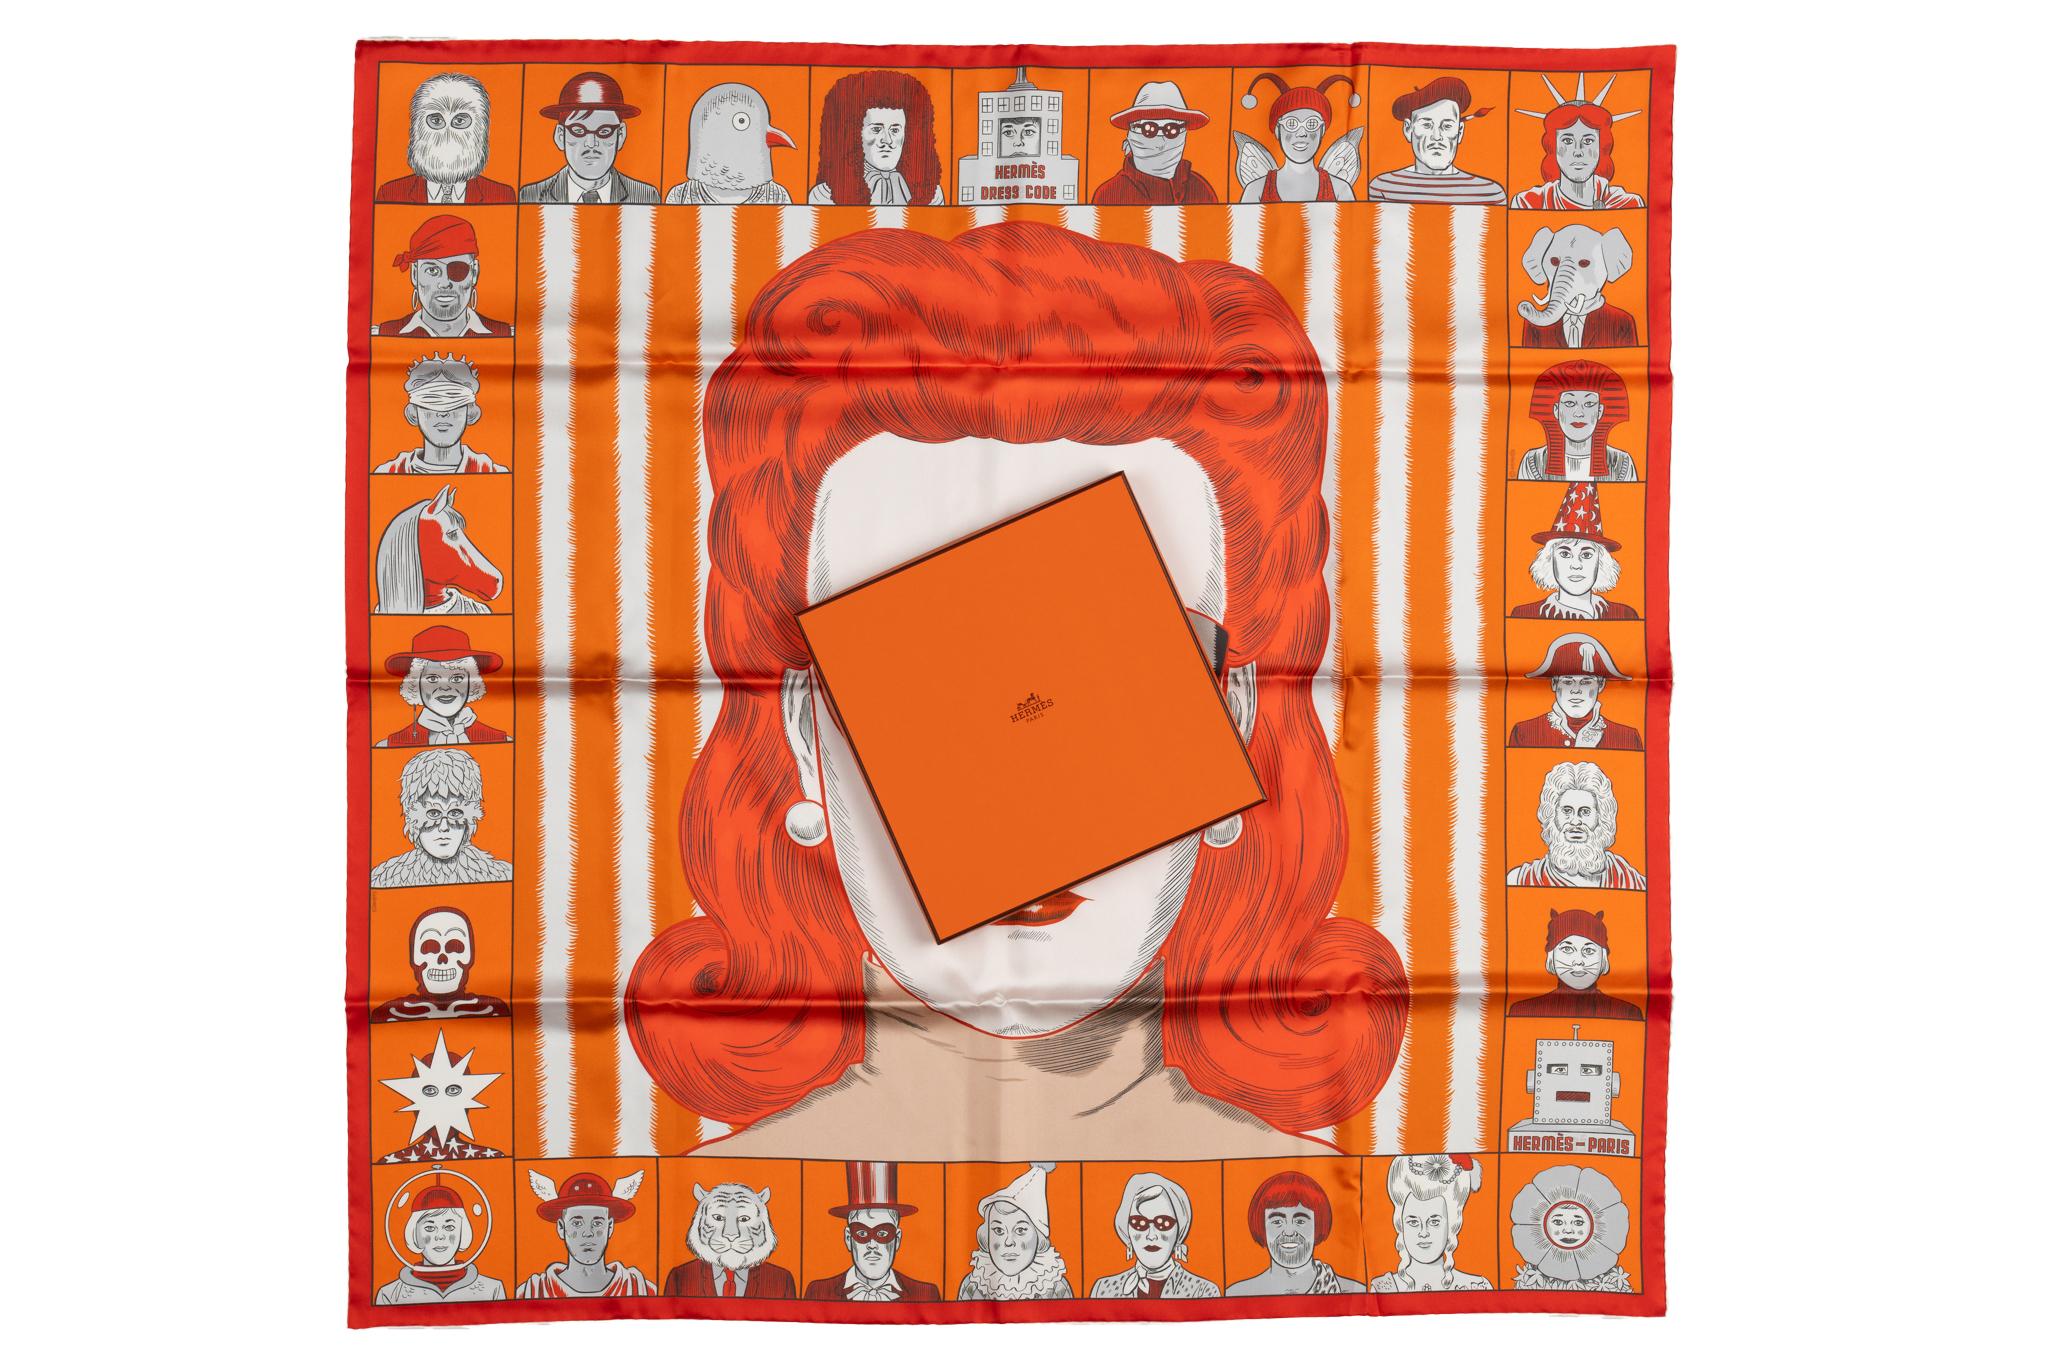 Hermès double face scarf in silk twill with hand-rolled edges (100% silk). The scarf is printed on both sides in two different color combinations! This innovative technique provides two colorful scarves in one.
Brand new with original box.